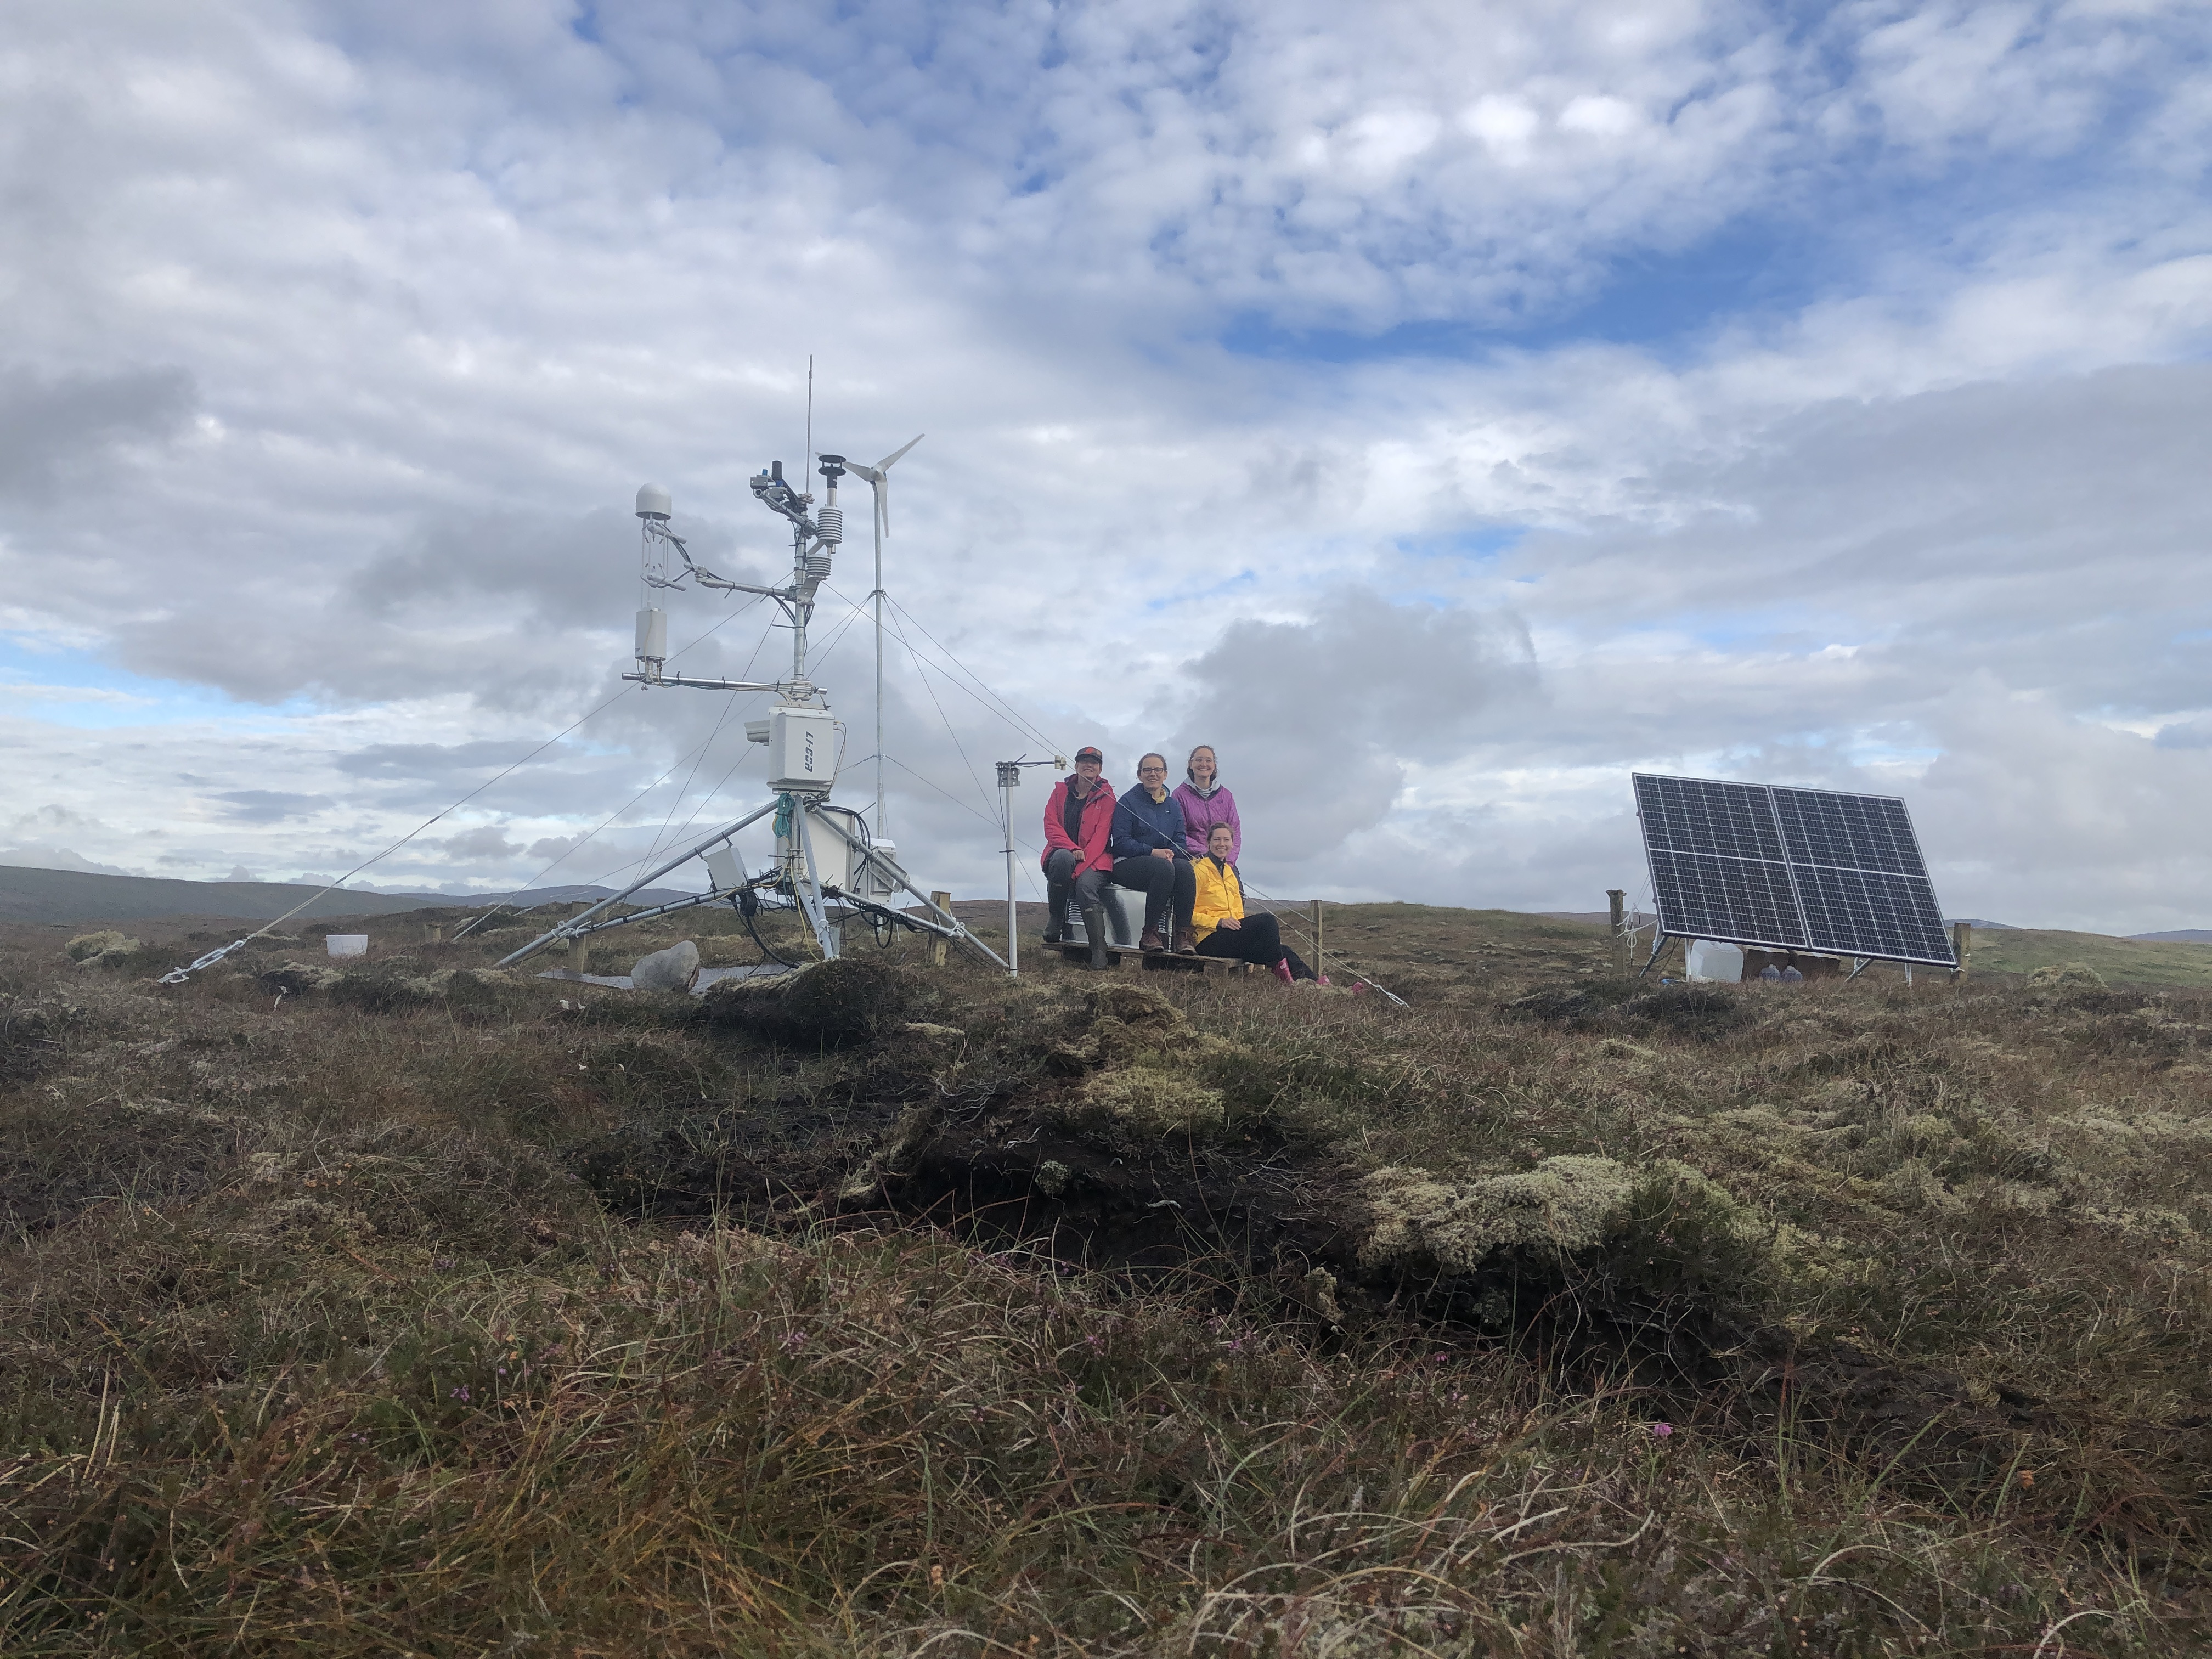 Image of the most northerly UK flux tower at Girlta, Shetland, on eroding peatland. Photo: James Hutton Institute